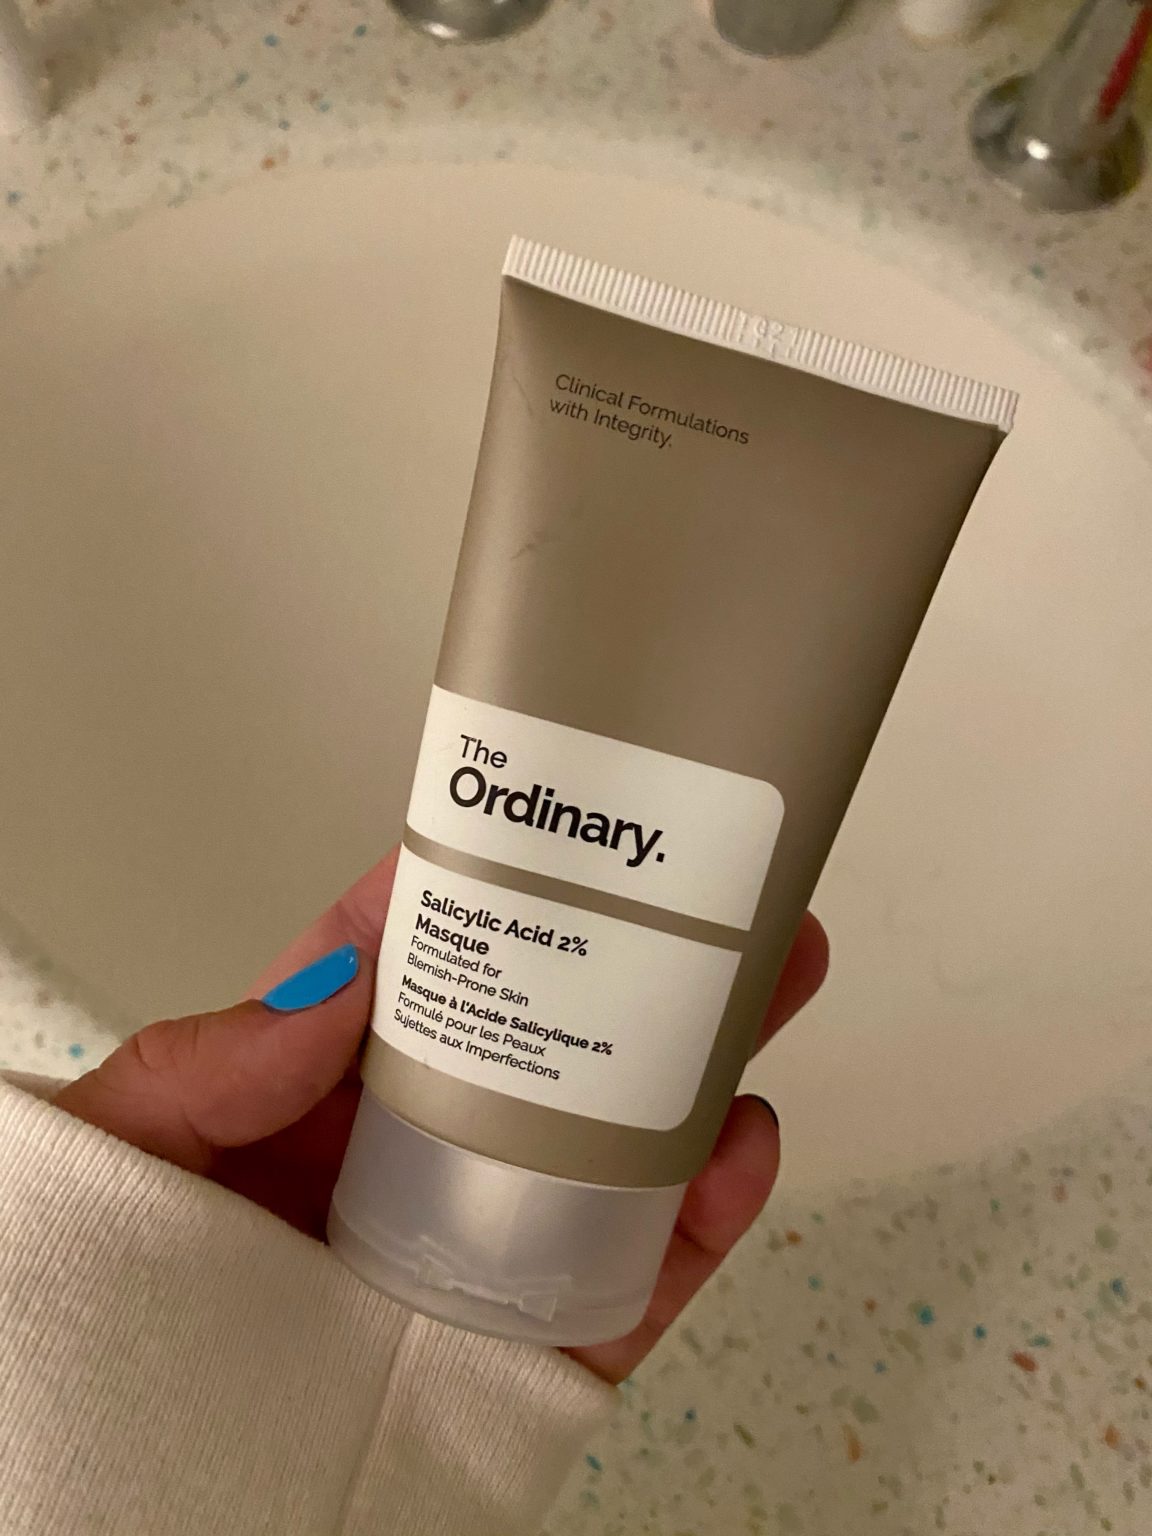 We Tried The Ordinary Salicylic Acids Review